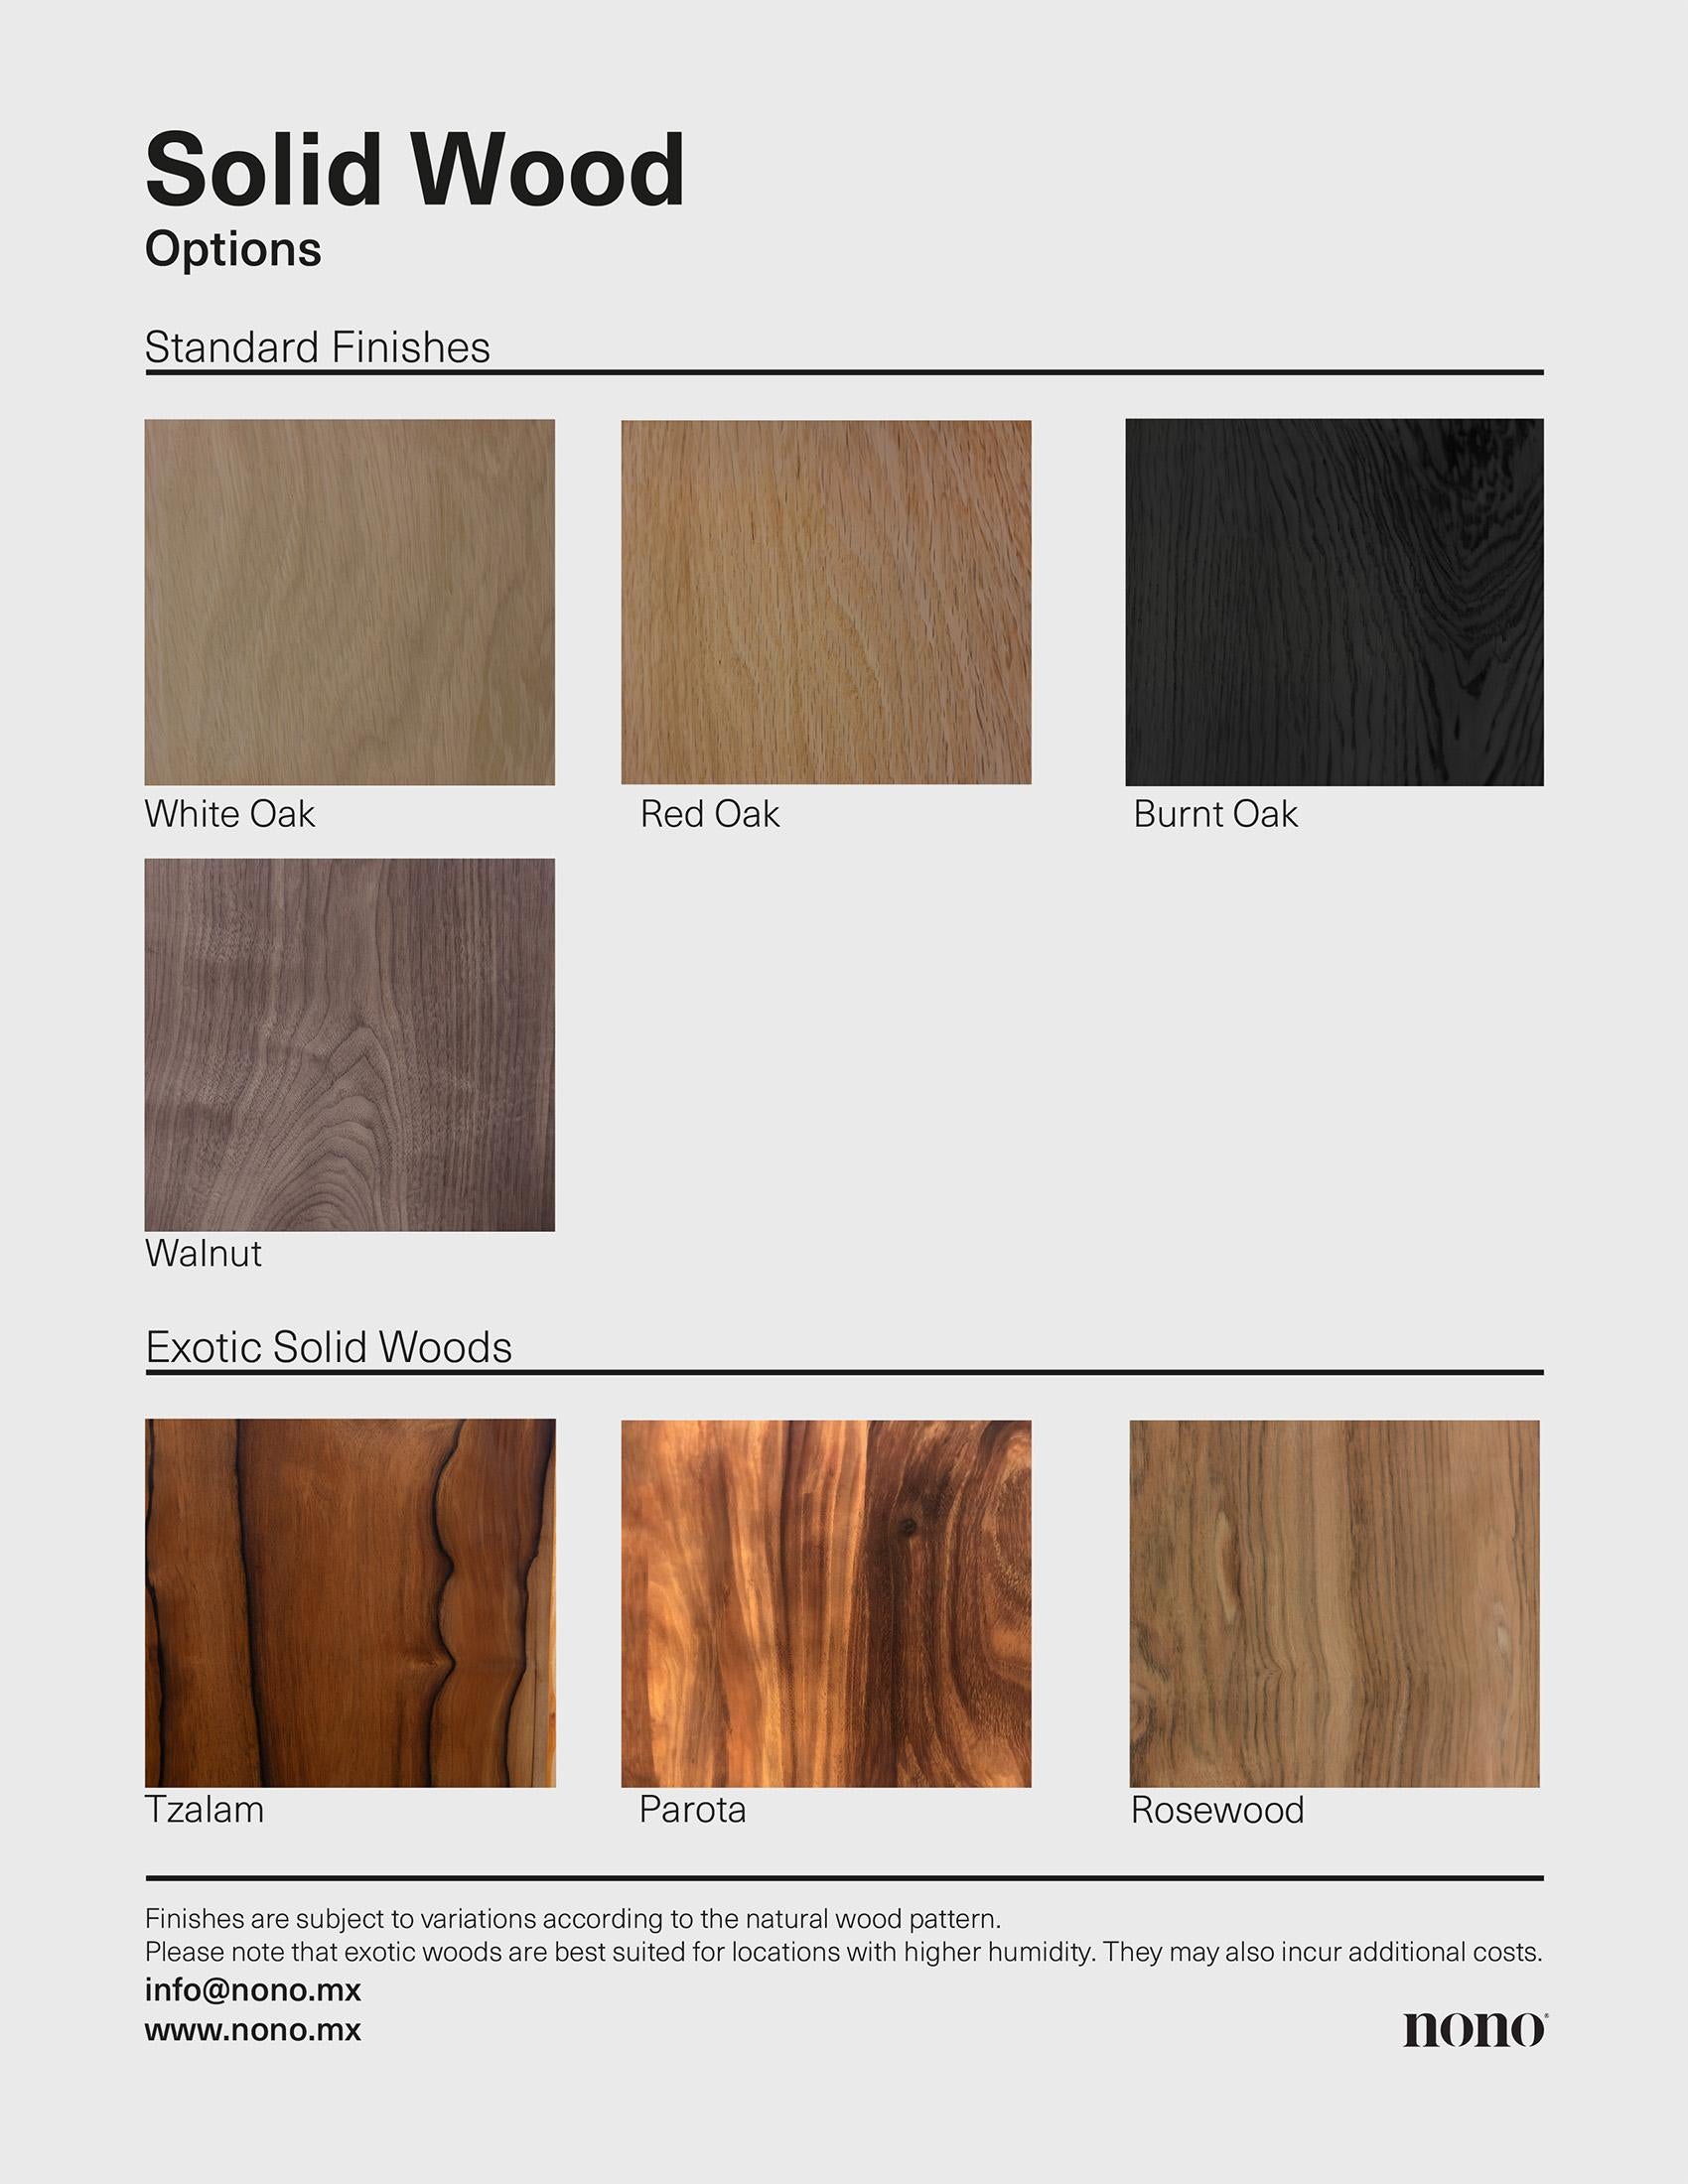 MATERIAL OPTIONS

Every NONO product is hand-crafted and made to order with the highest quality standards. We have an extensive list of materials that range from solid woods to exquisite veneers and lacquered surfaces. 

We know customization is so